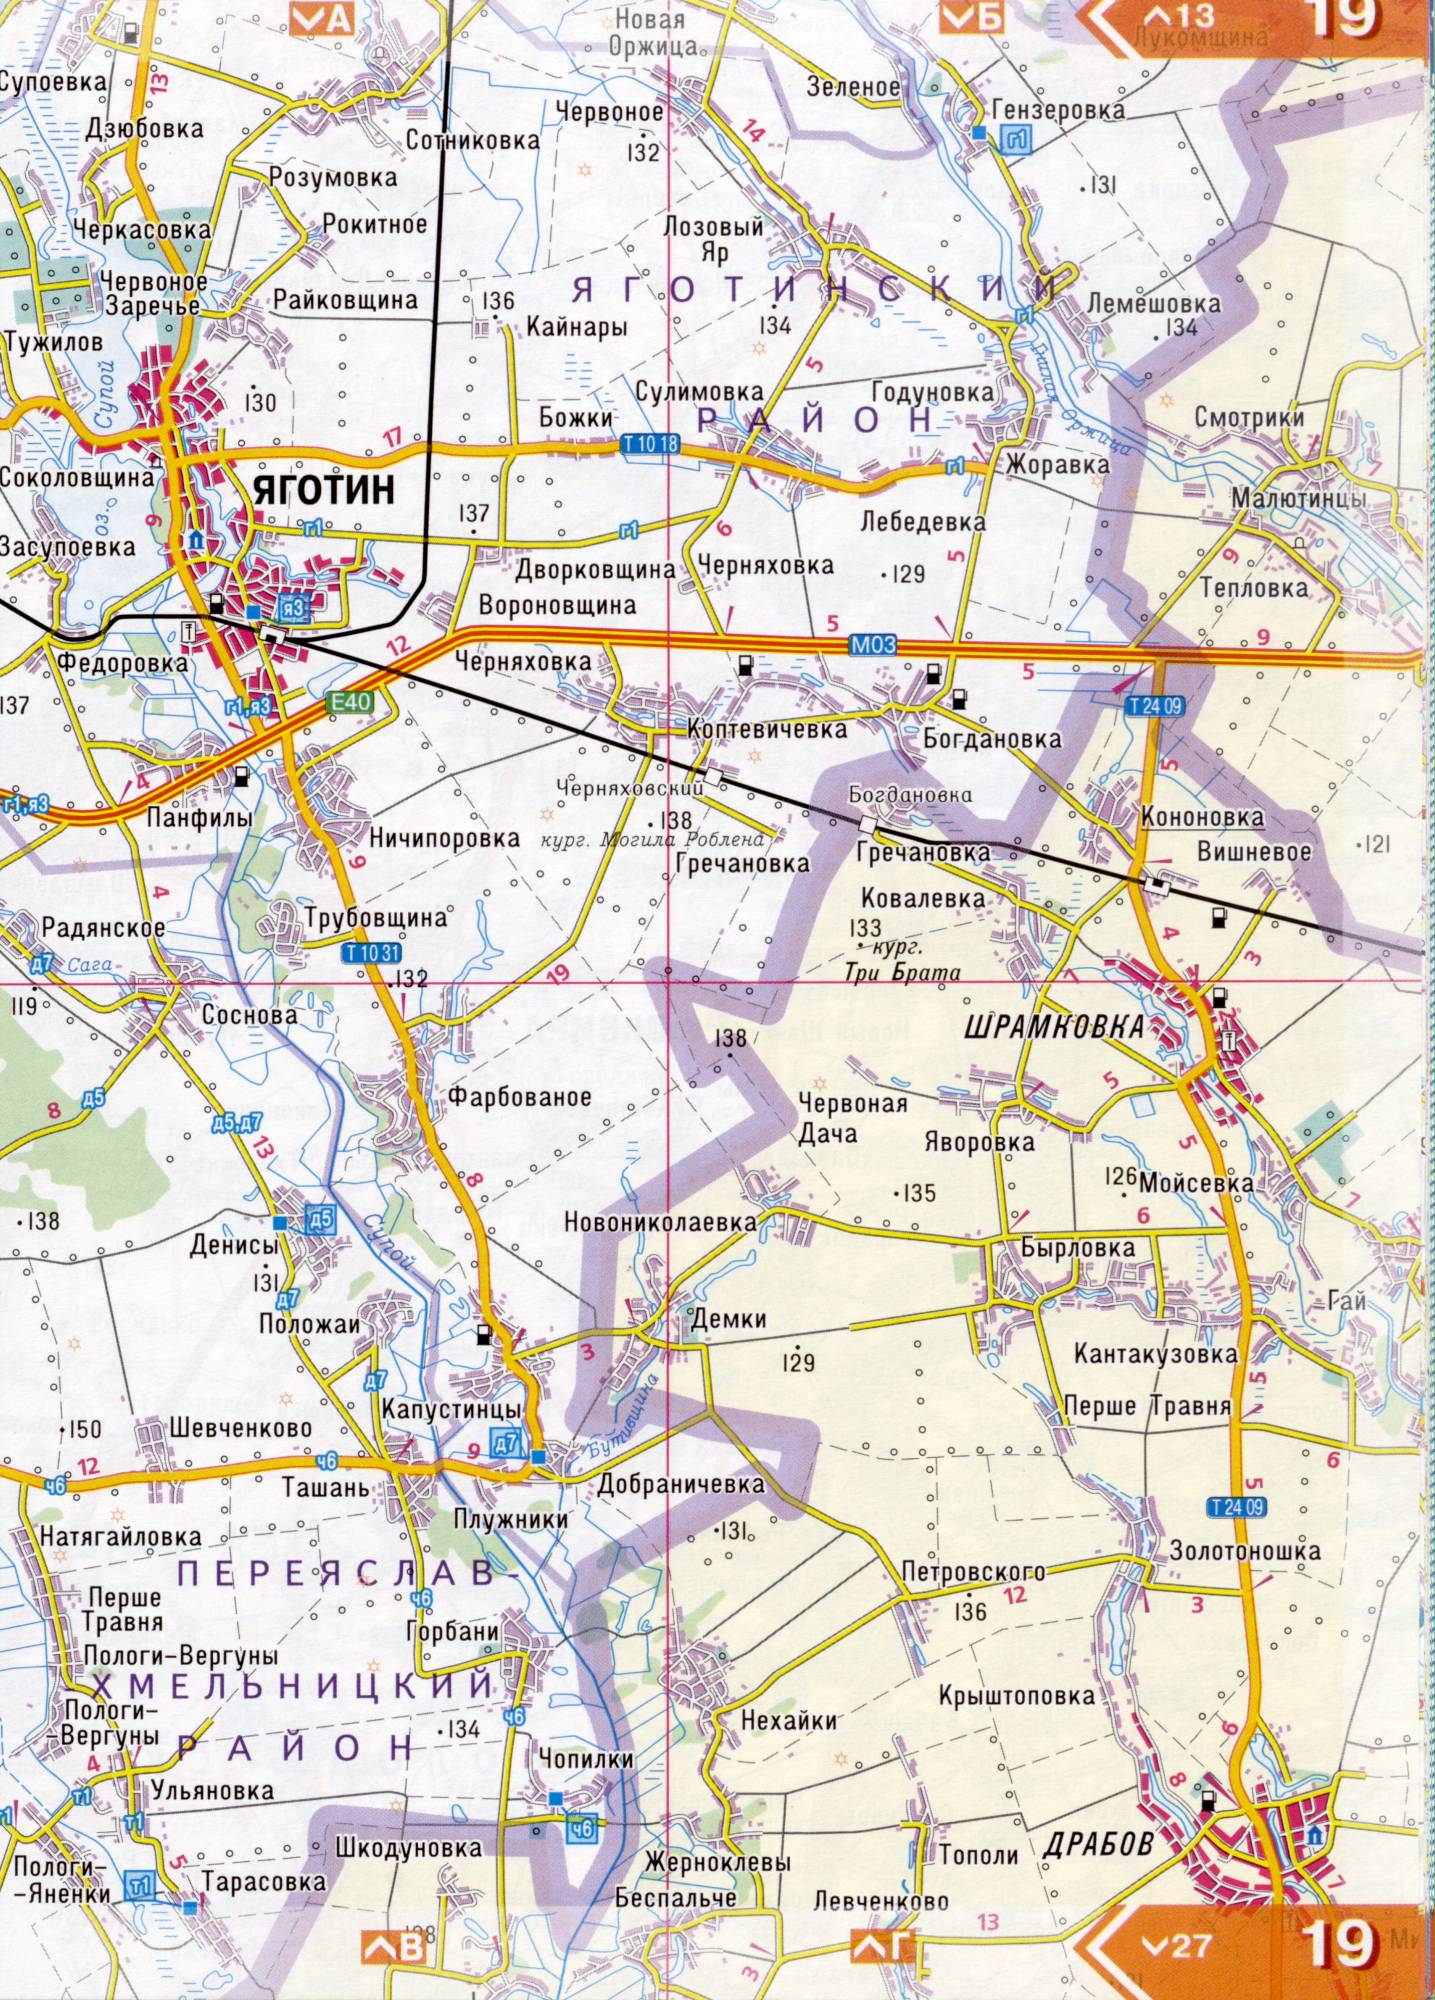 Atlas of the Kiev region. A detailed map of the Kiev region of the atlas of highways. Kyiv region on a detailed map of scale 1cm = 3km. Free, F3 - Yahotyn